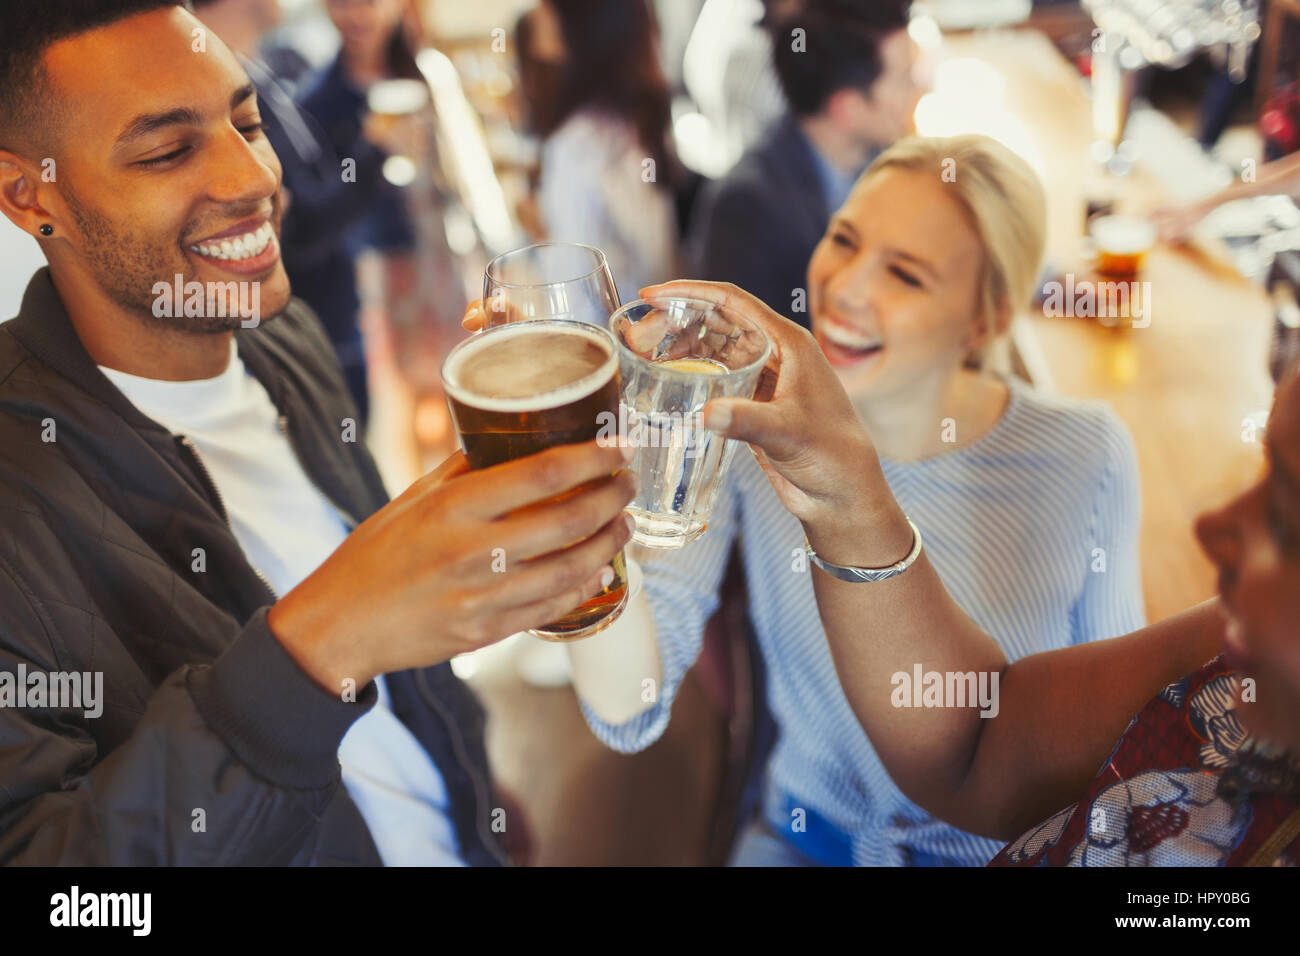 Enthusiastic friends toasting beer and wine glasses at bar Stock Photo